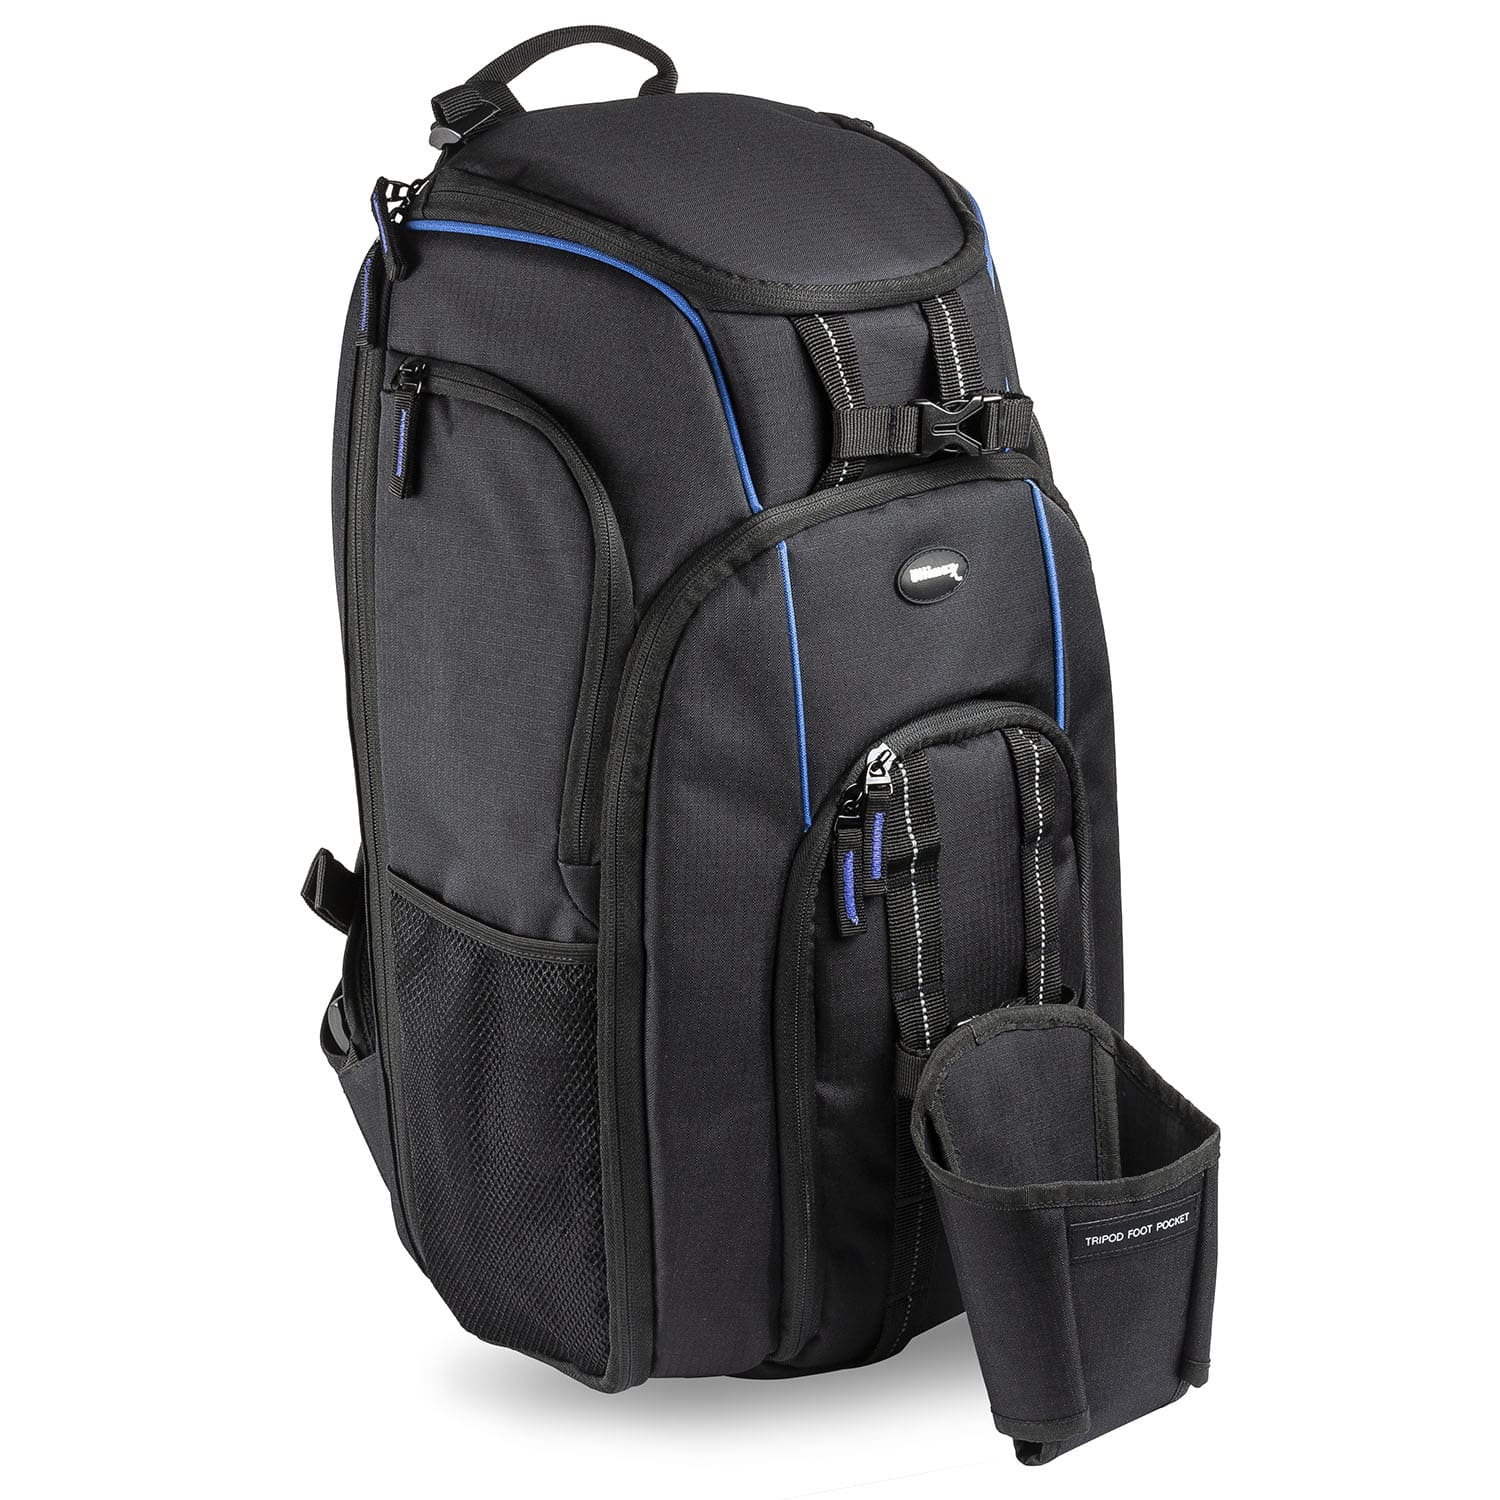 PROFESSIONAL DELUXE CAMERA BACKPACK WITH REMOVEABLE INSERT - Ultimaxx